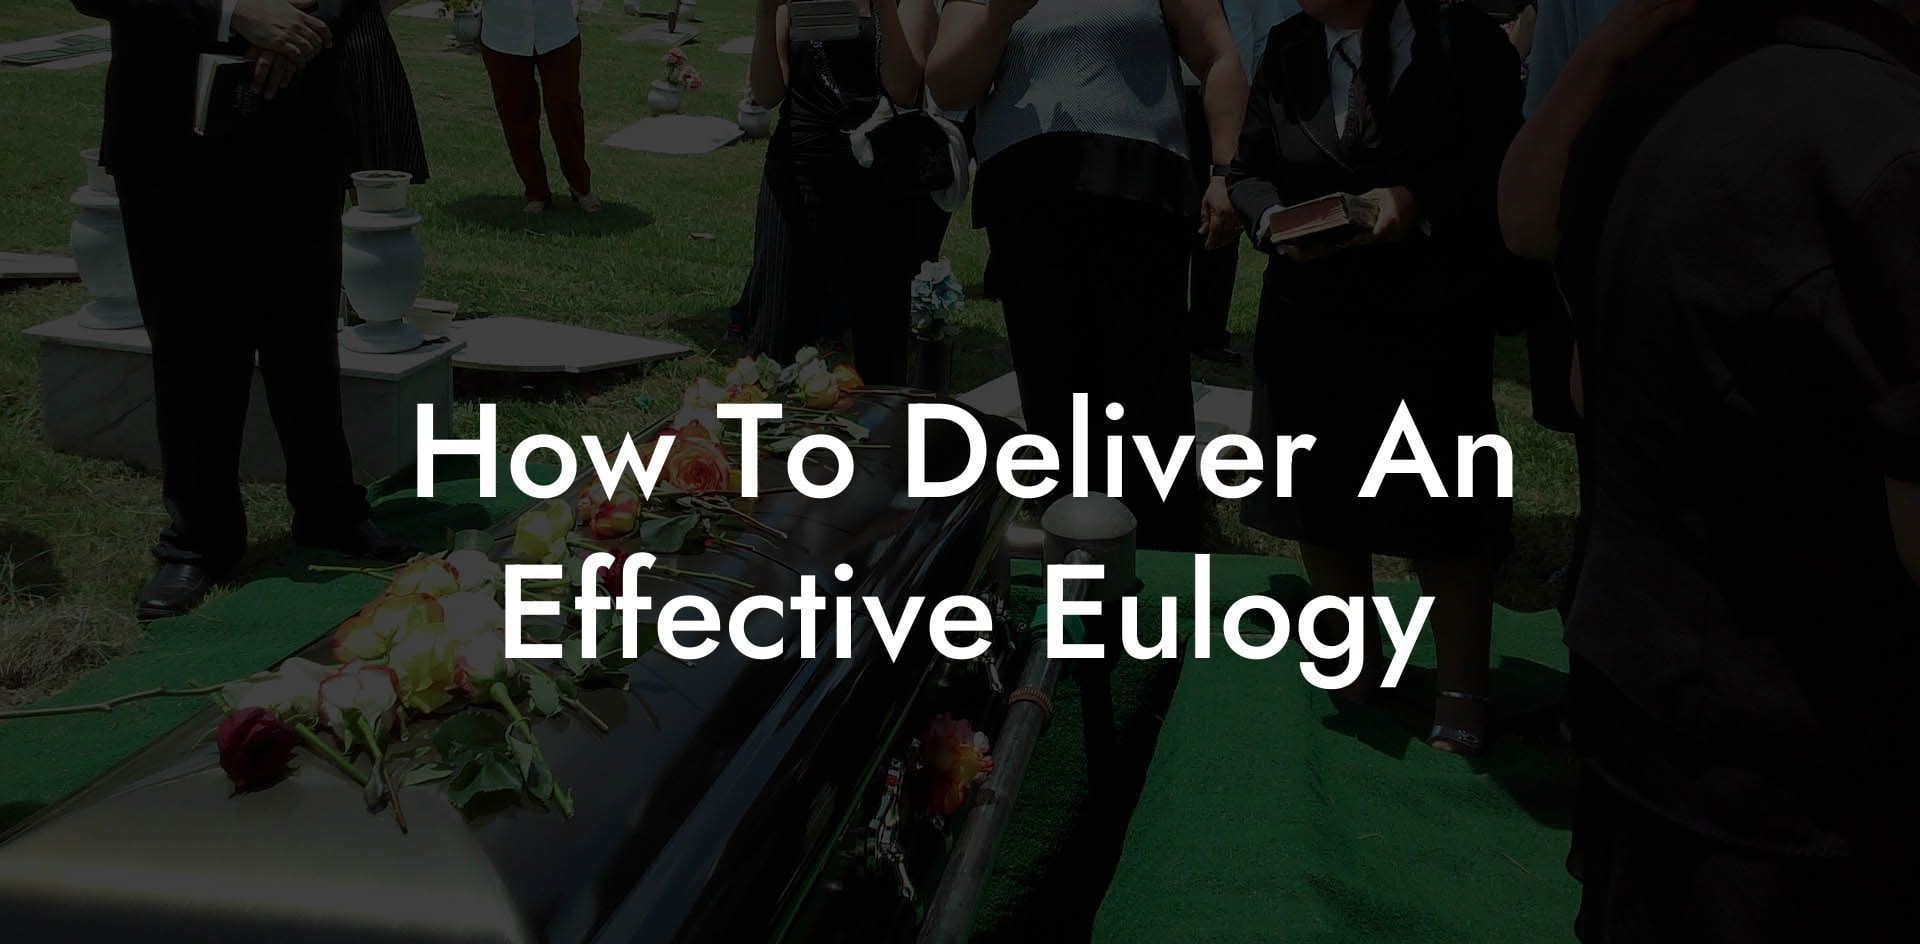 How To Deliver An Effective Eulogy